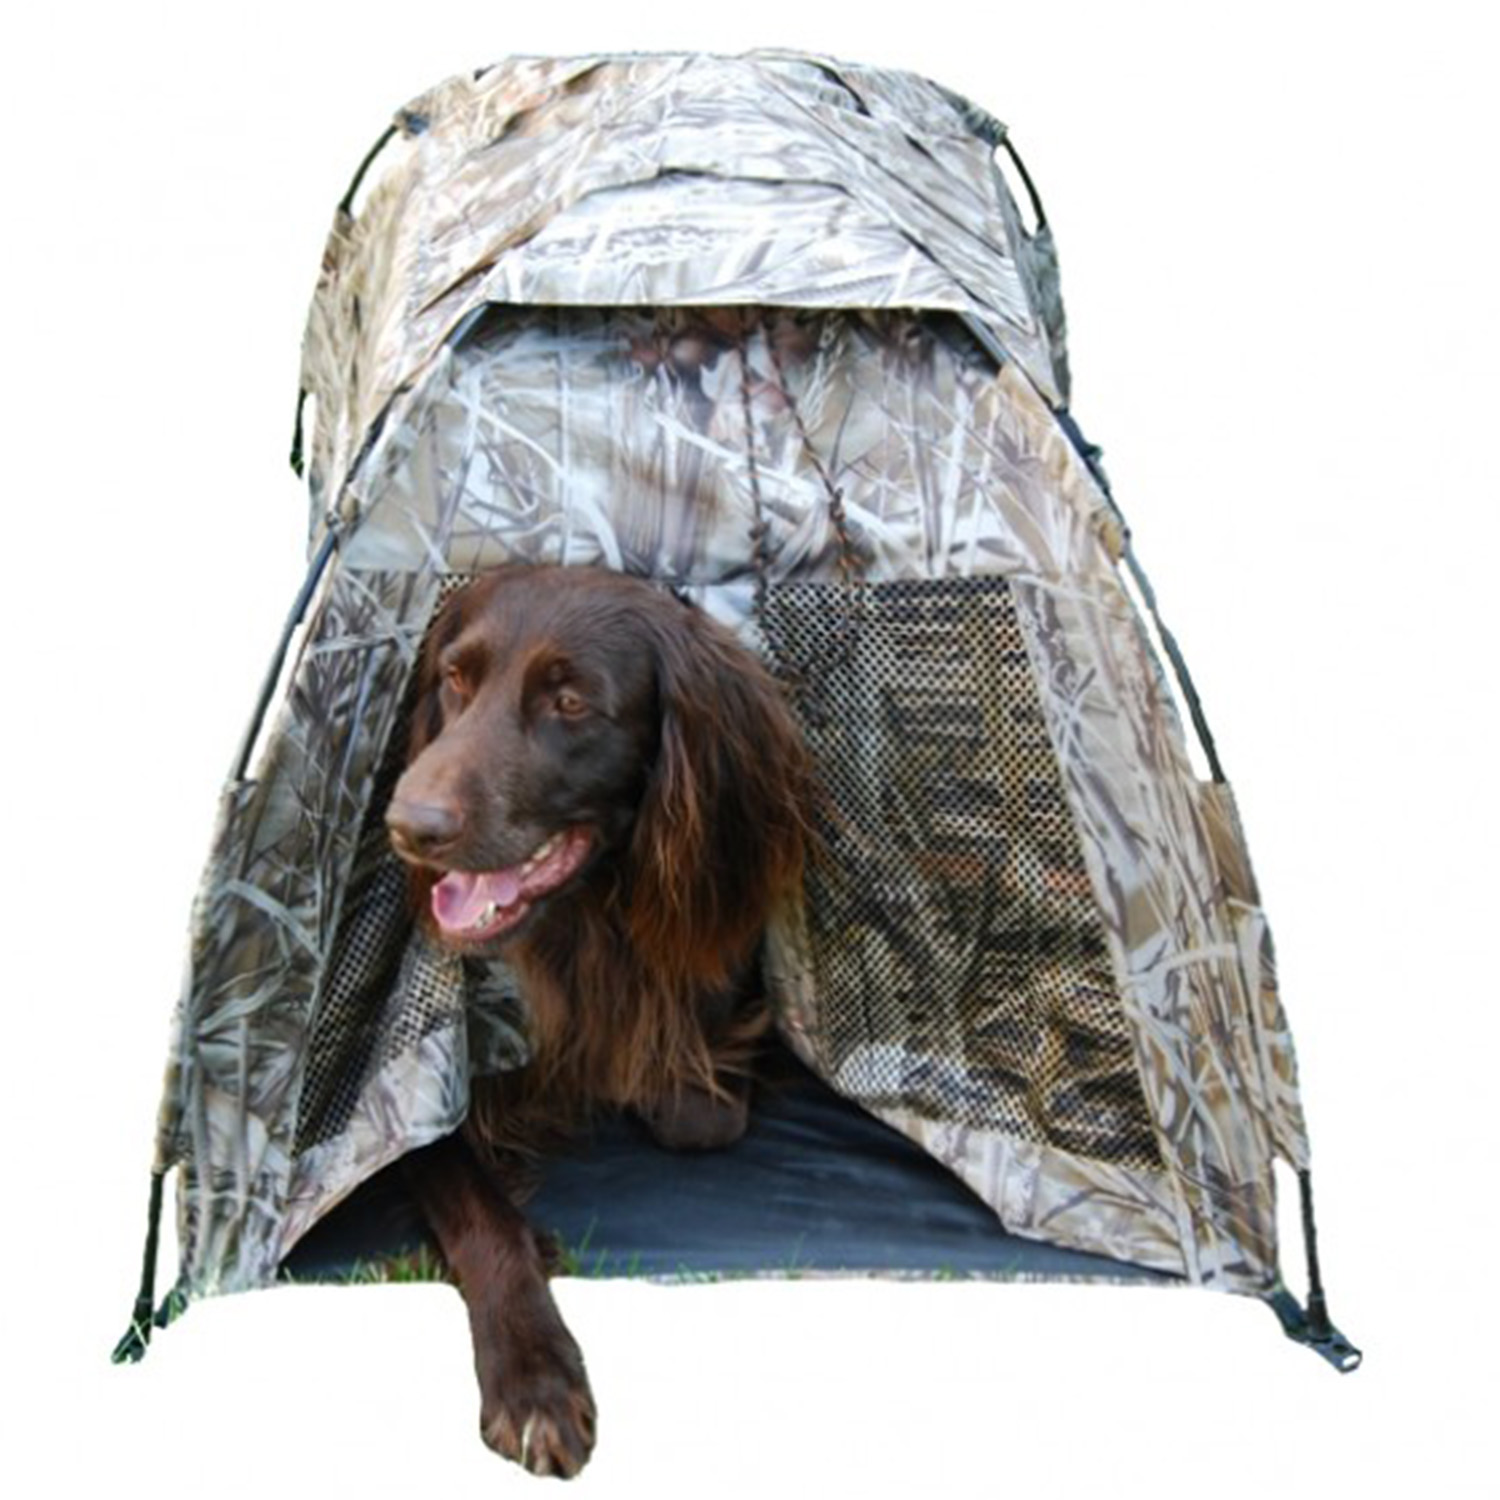 Dog Camo Tent Pop Up - Camouflage Tents & Blindes